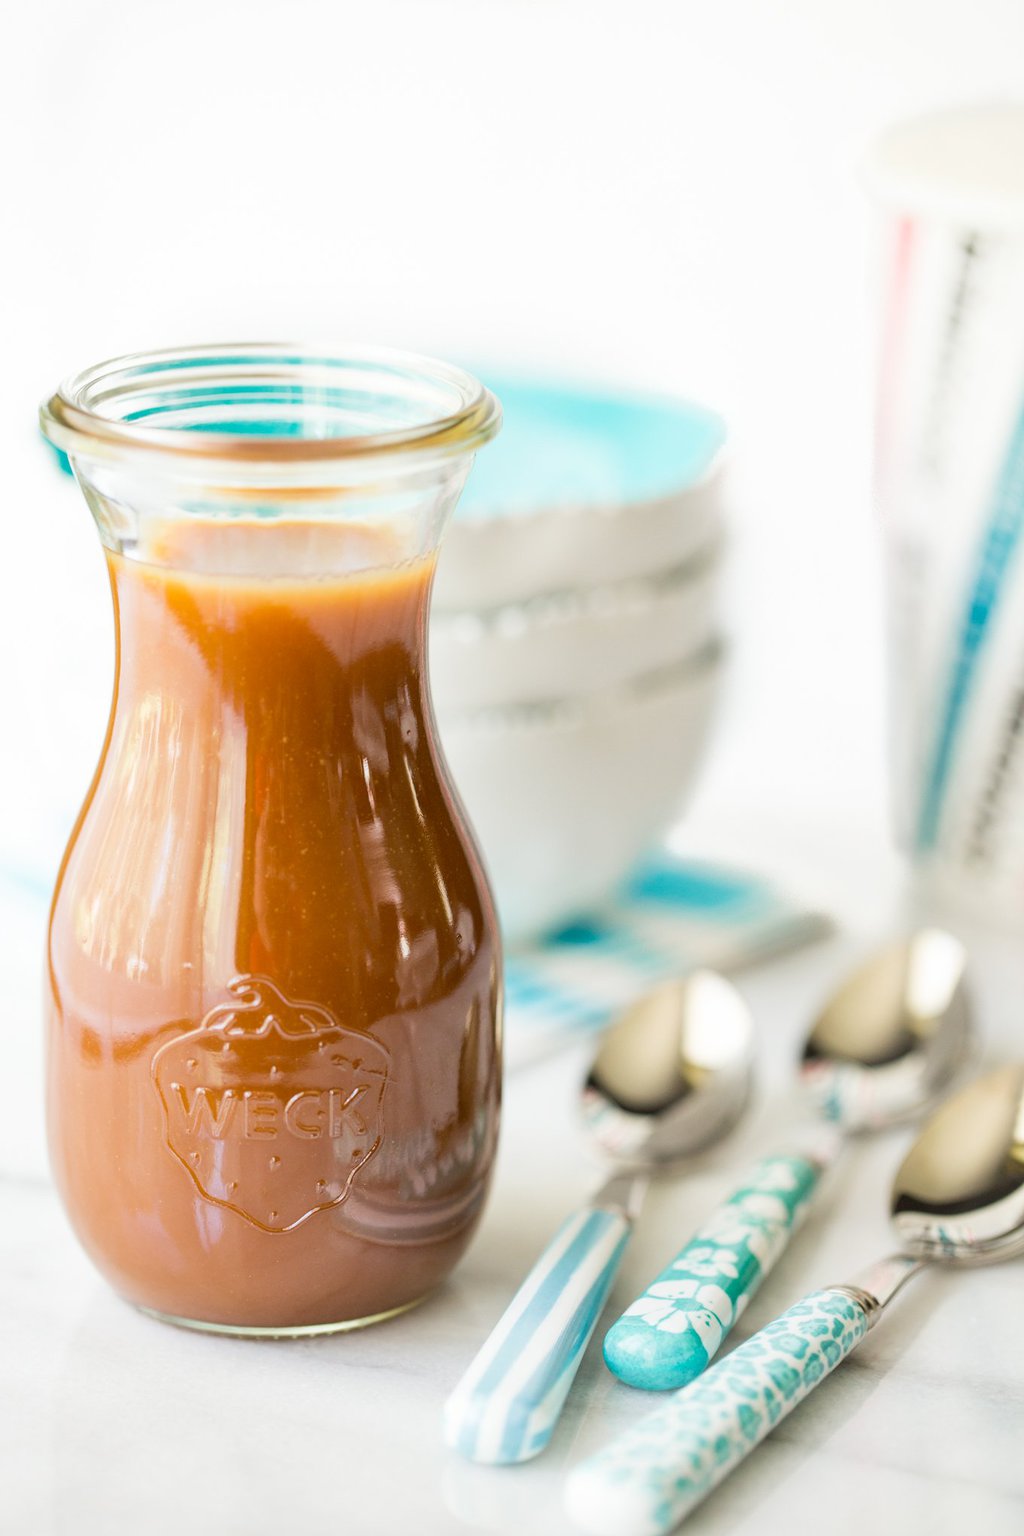 Microwave (Real Deal) Caramel Sauce - decadently delicious, old fashioned caramel sauce made with an easy, new fangled method!